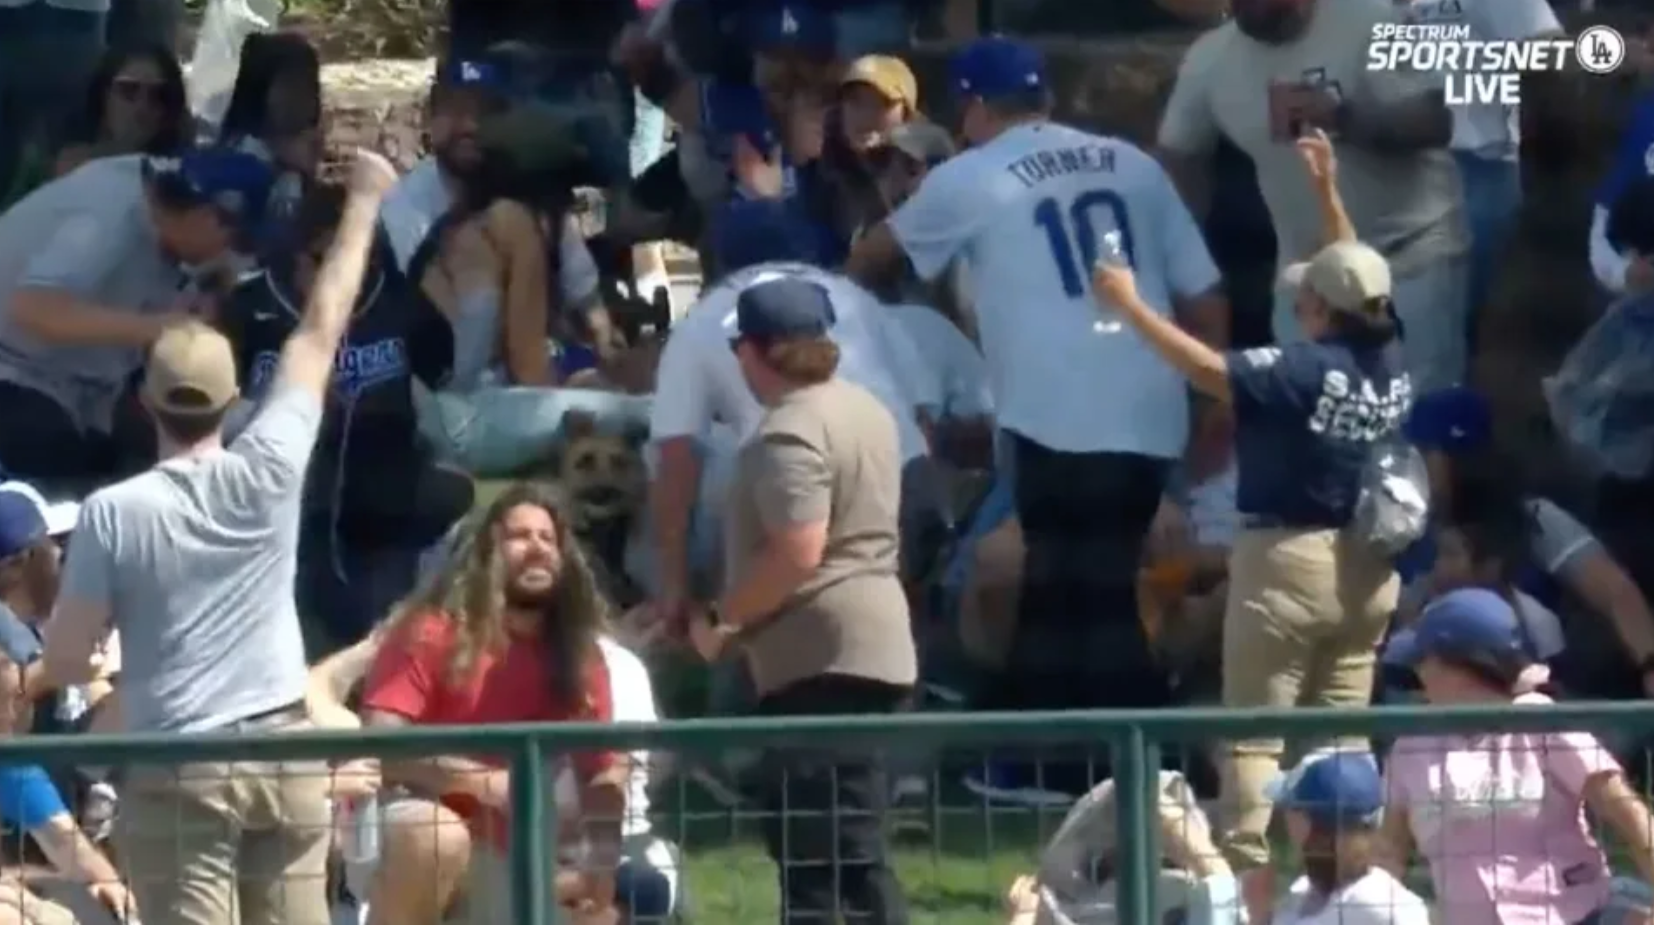 Fan at White Sox-Royals game struck in mouth by foul ball